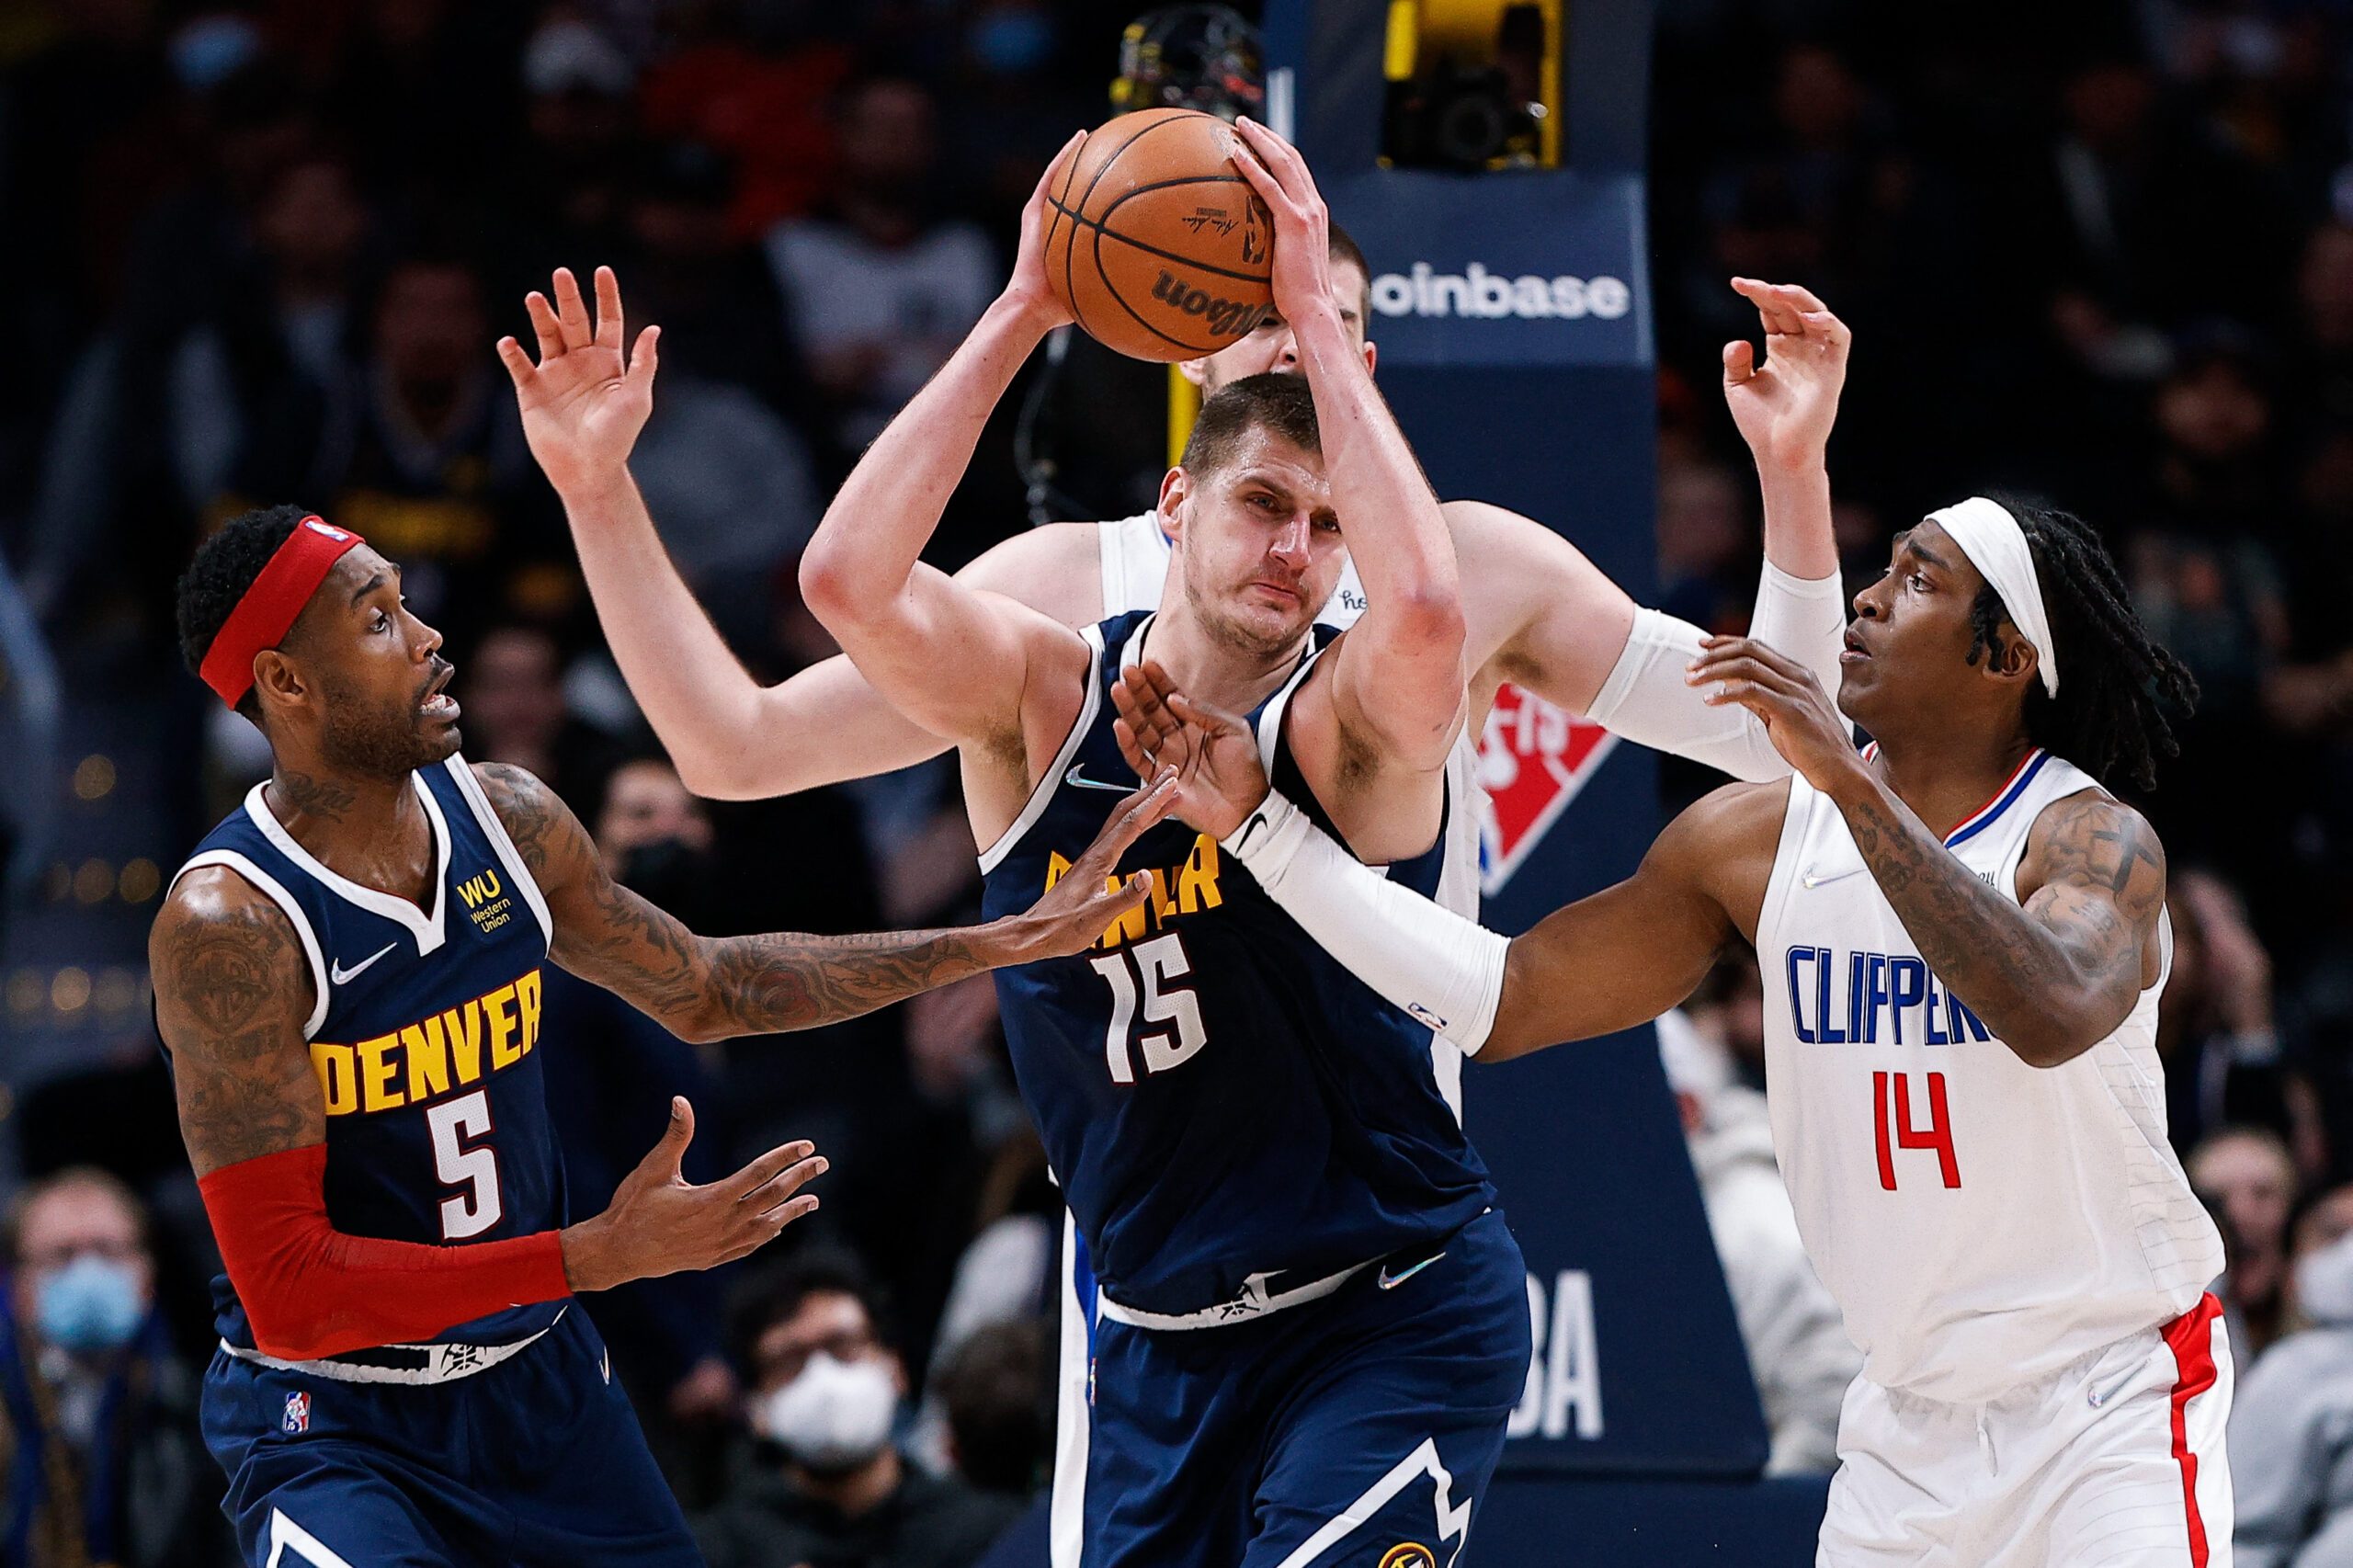 Nikola Jokic’s 49-point triple-double lifts Nuggets over Clippers in OT